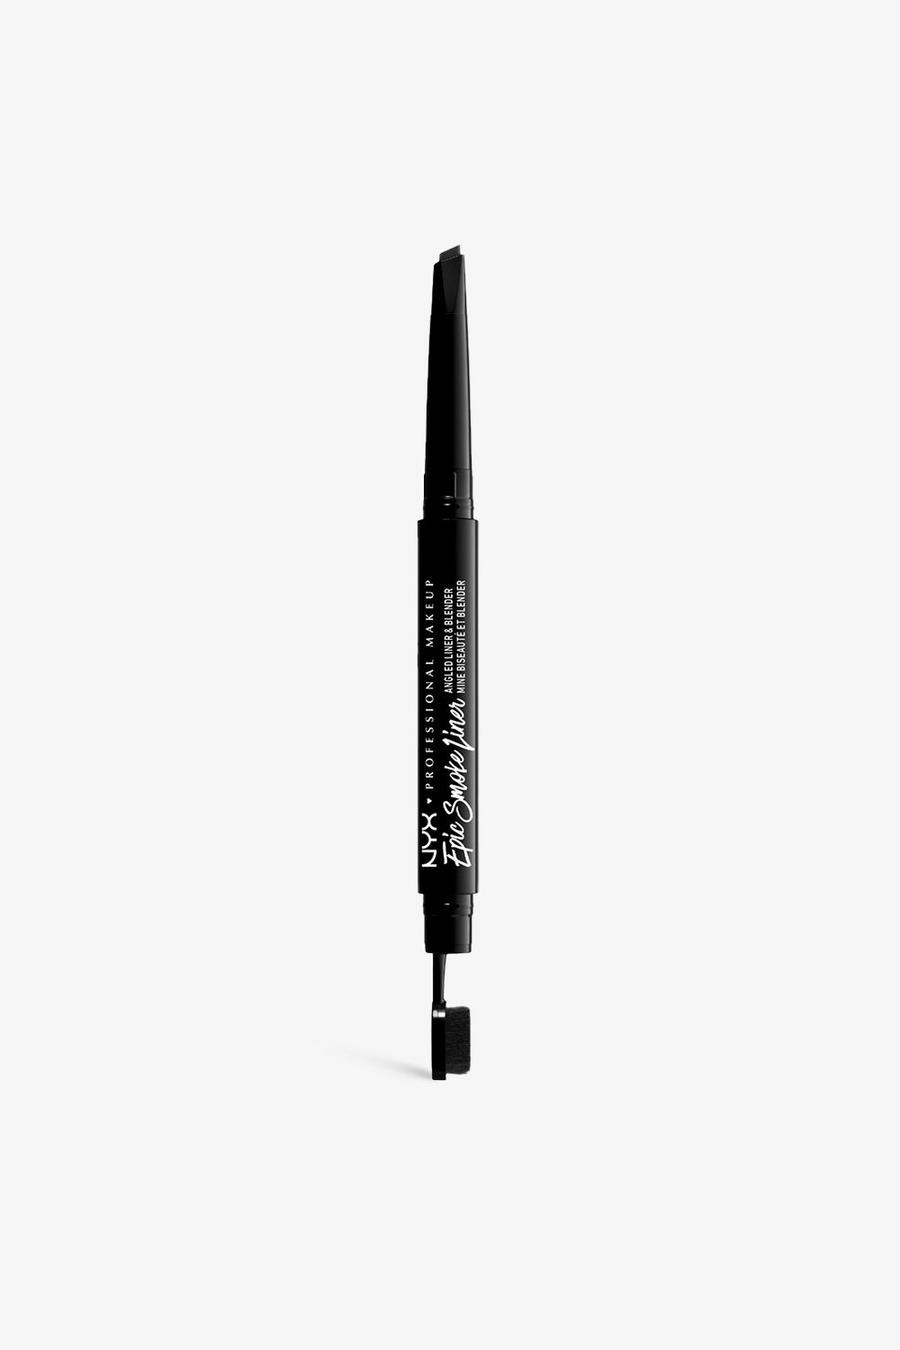 NYX Professional Makeup - Eyeliner ombreur à double embout - Epic Smoke Liner, 12 black smoke